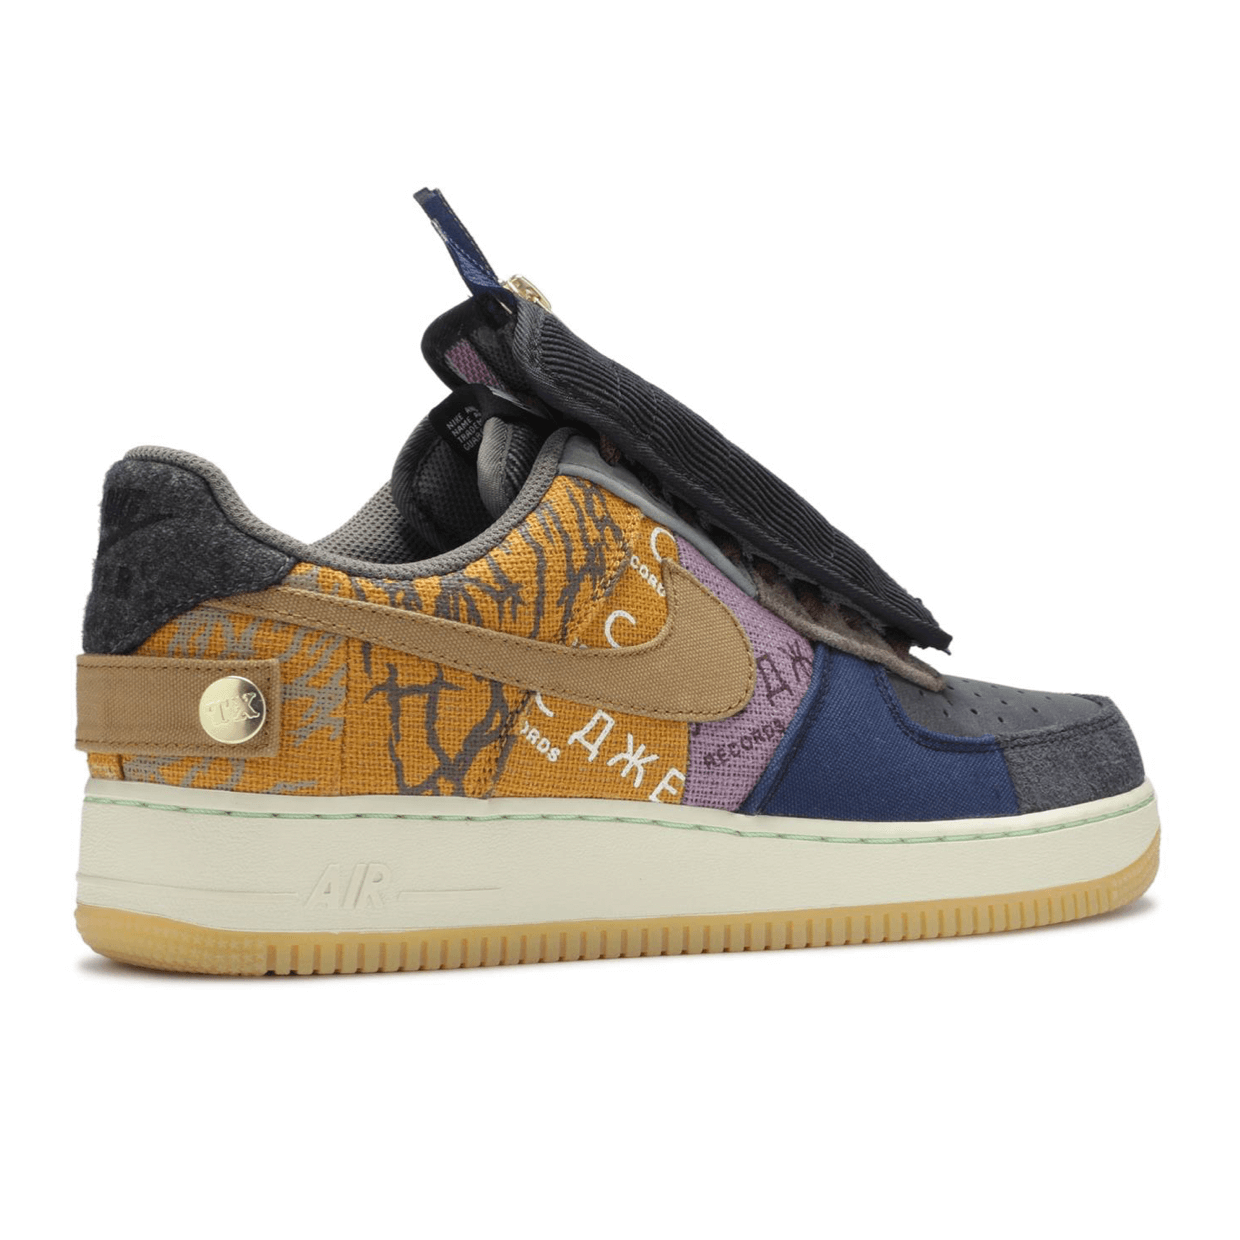 Air Force 1 Low Travis Scott Cactus Jack by Nike from £450.00